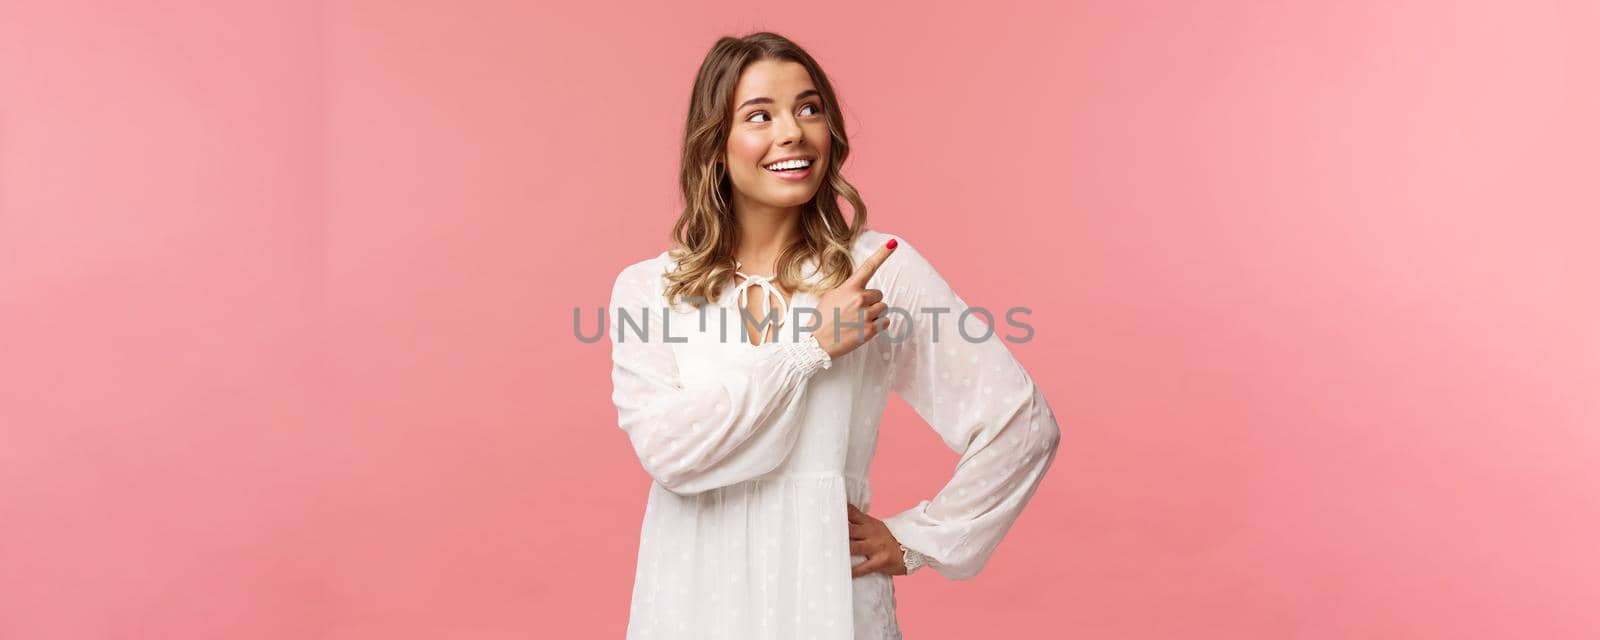 Look at this. Cheerful lovely blond european woman 20s in white cute dress, pointing at upper right corner with beaming smile, looking pleased, satisfied with good offer, pink background.